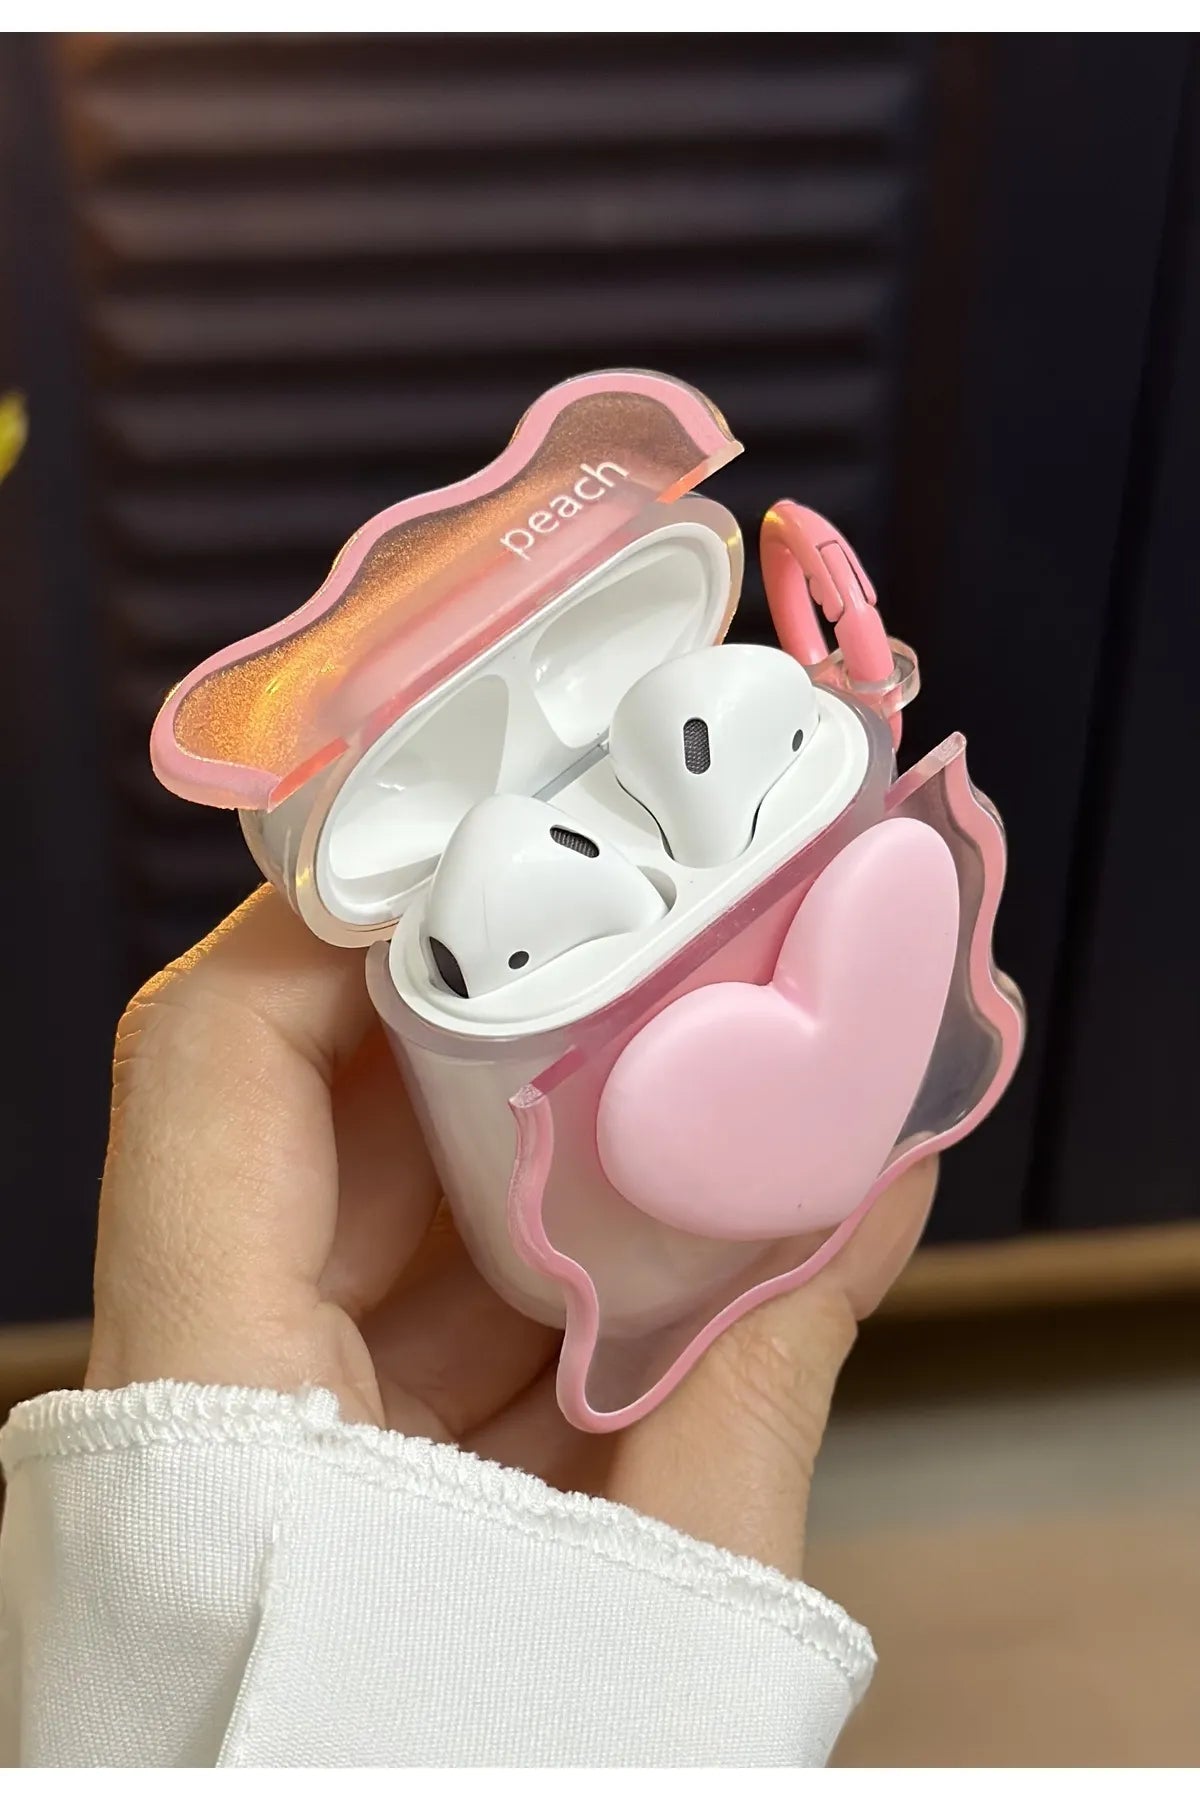 1ST GENERATION AND 2ND GENERATION Compatible Apple AirPods Silicone Case - Cute, Thick Protective Cover with Keychain - Perfect Gift for Girls & Women